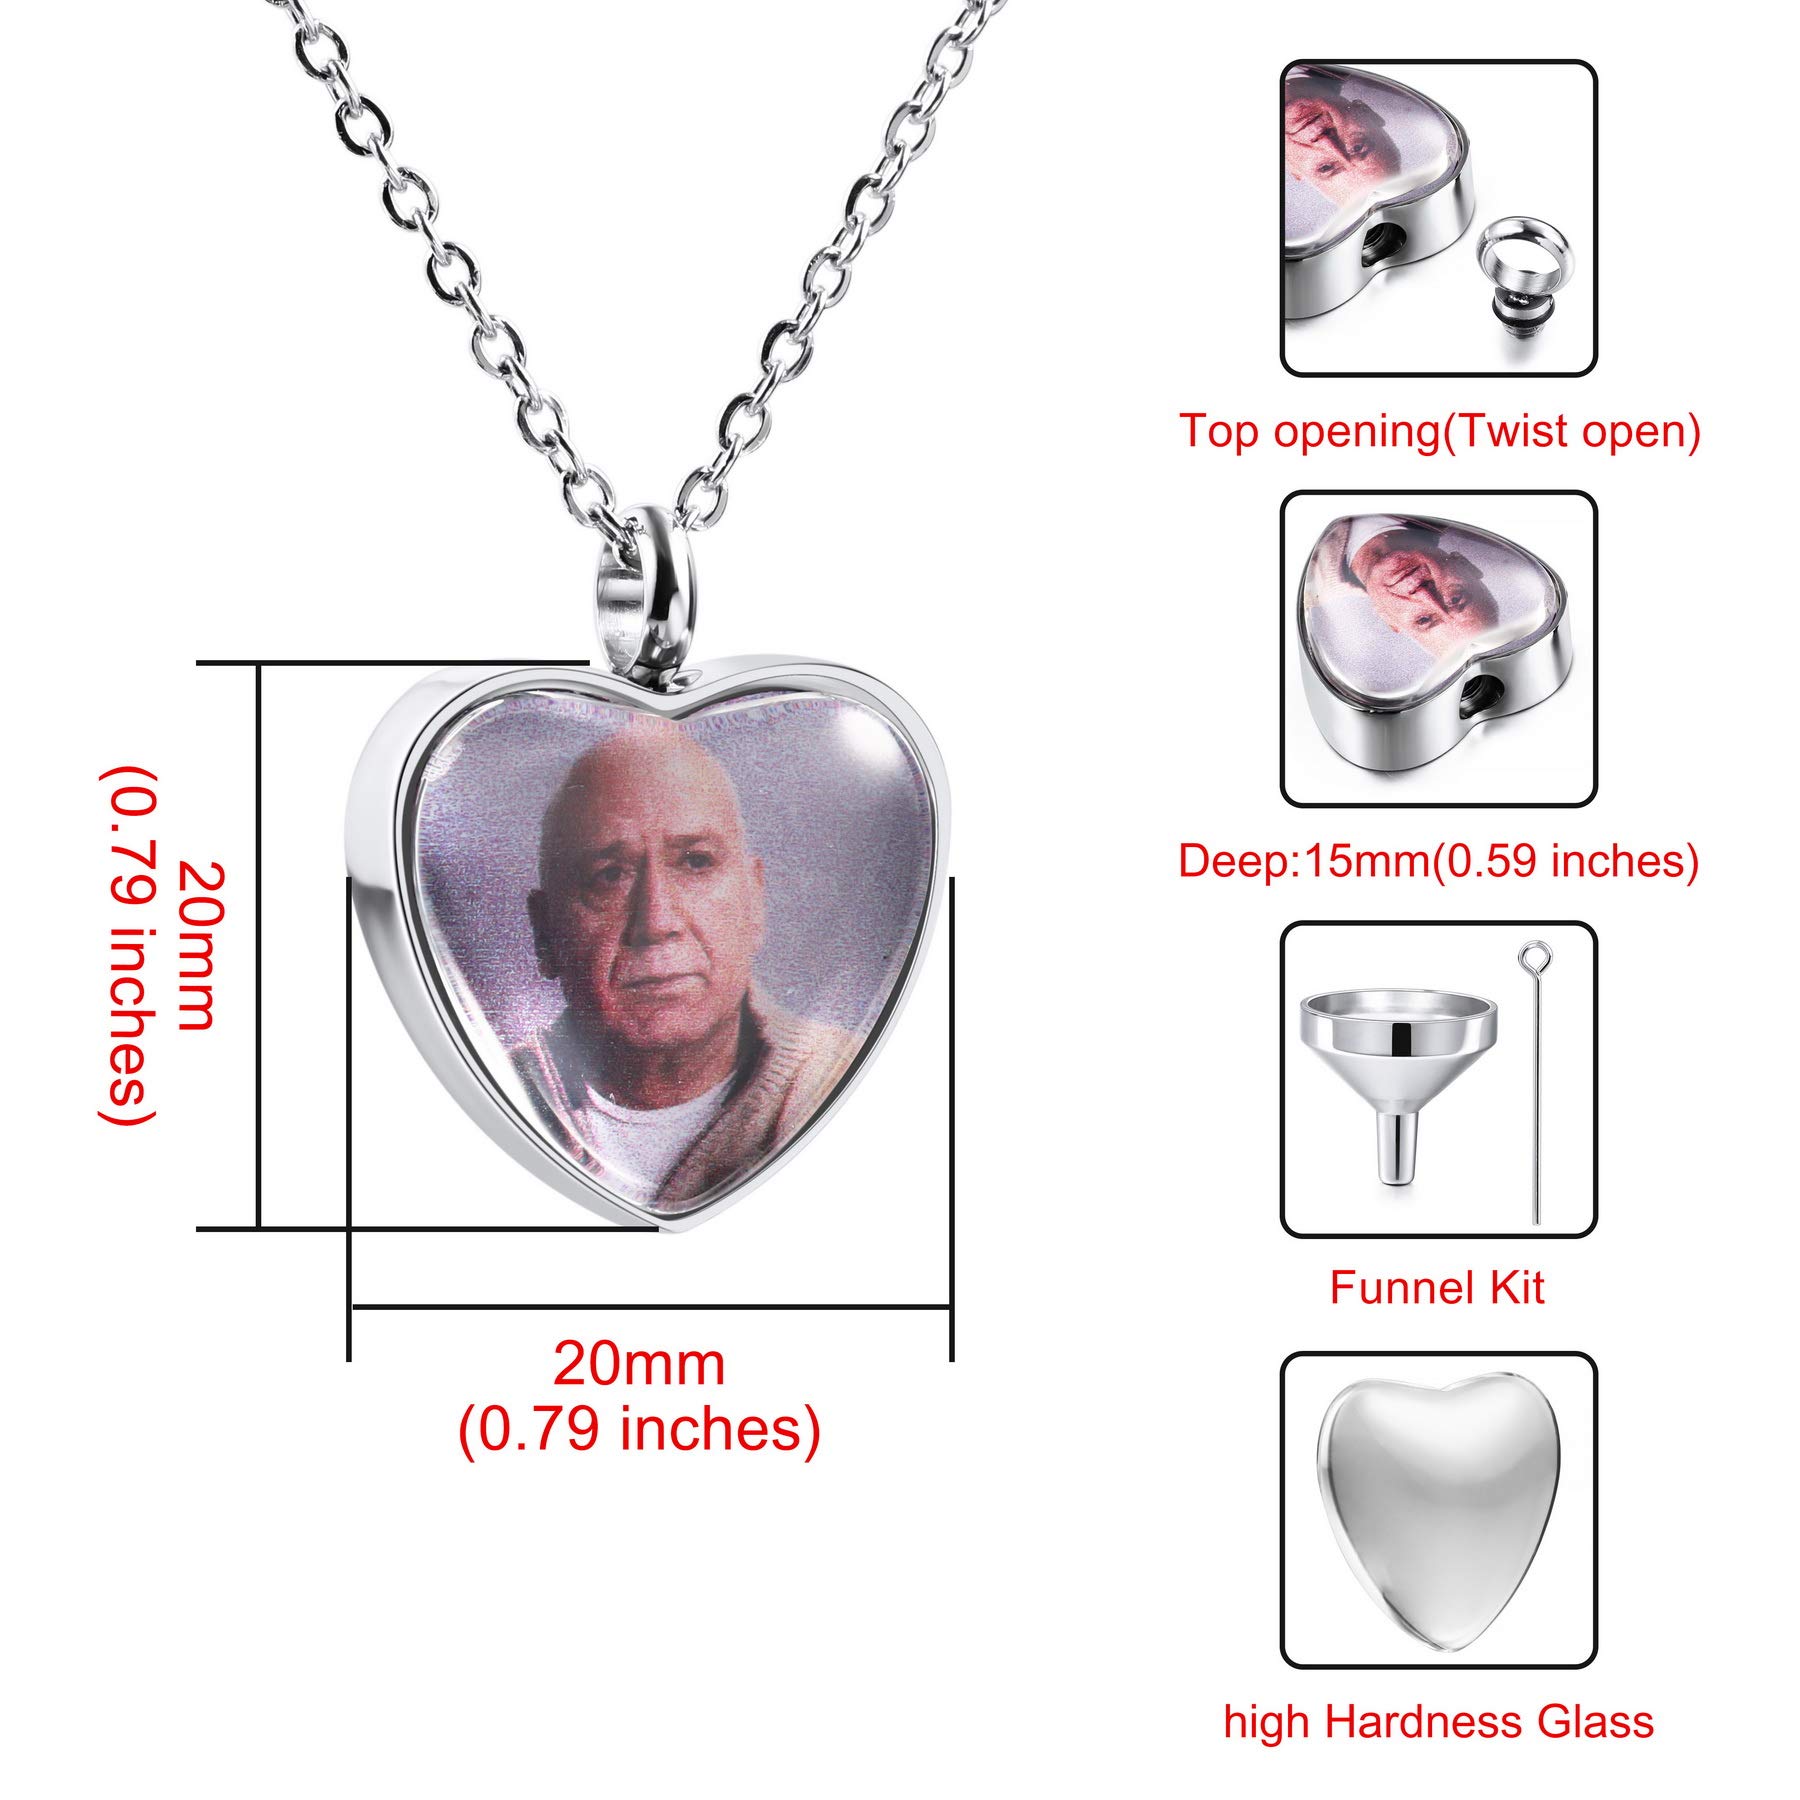 MeMeDIY Personalized Angel Wing Pendant Heart Urn Necklace Engraving Photo/Name for Men Women with Birthstone Stainless Steel Pet Human Ashes Holder Memorial Keepsake Cremation Funnel Kit